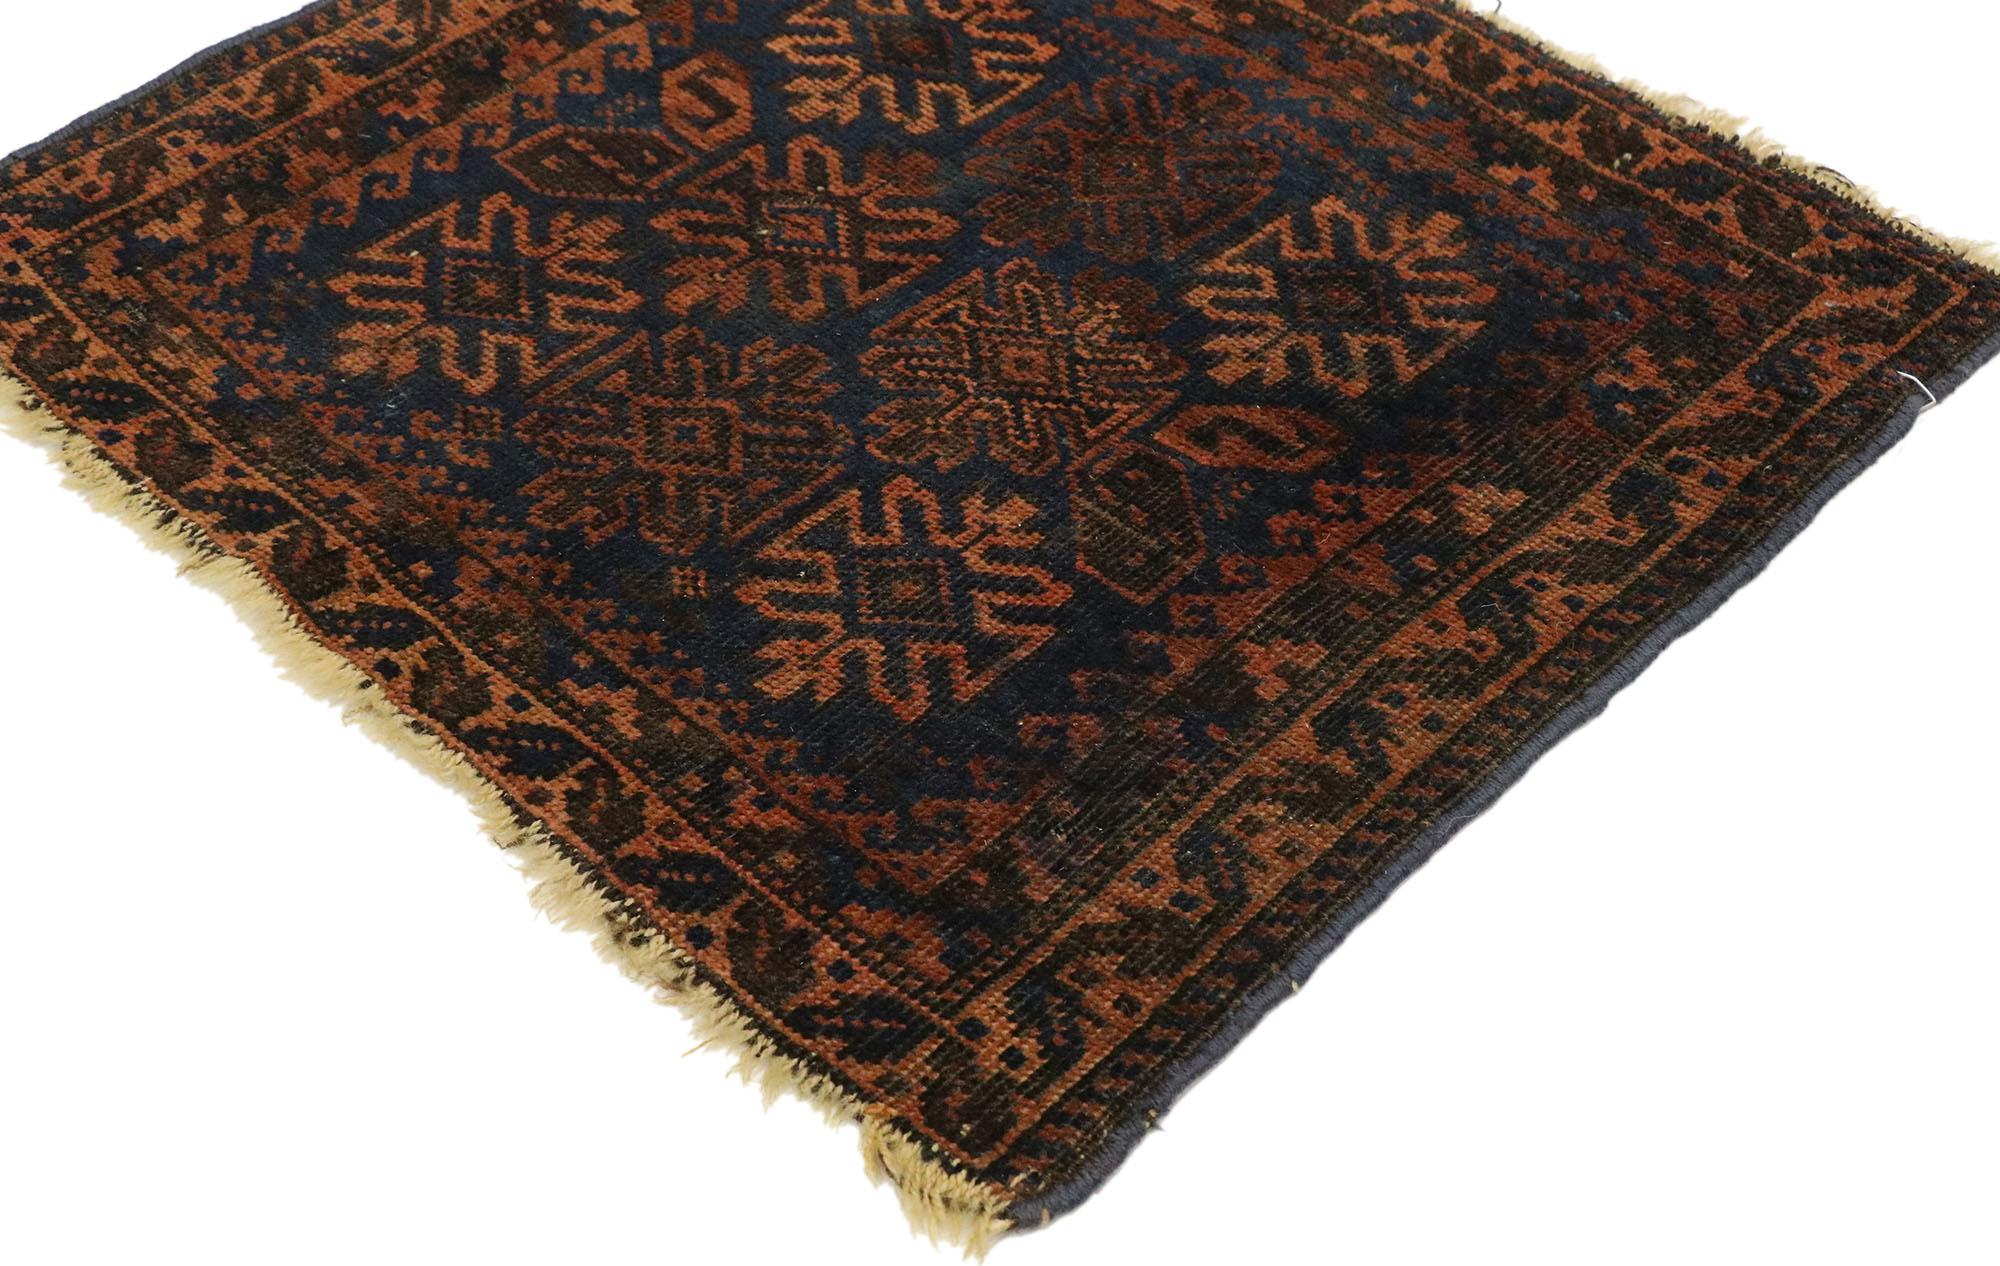 74303 Antique Persian Baluch Rug, 01'06 x 01'09. Persian Baluch rugs, originating from the Baluchistan region and crafted by the Baloch people, are distinguished handwoven textiles known for their tribal designs, earthy tones, and intricate motifs,